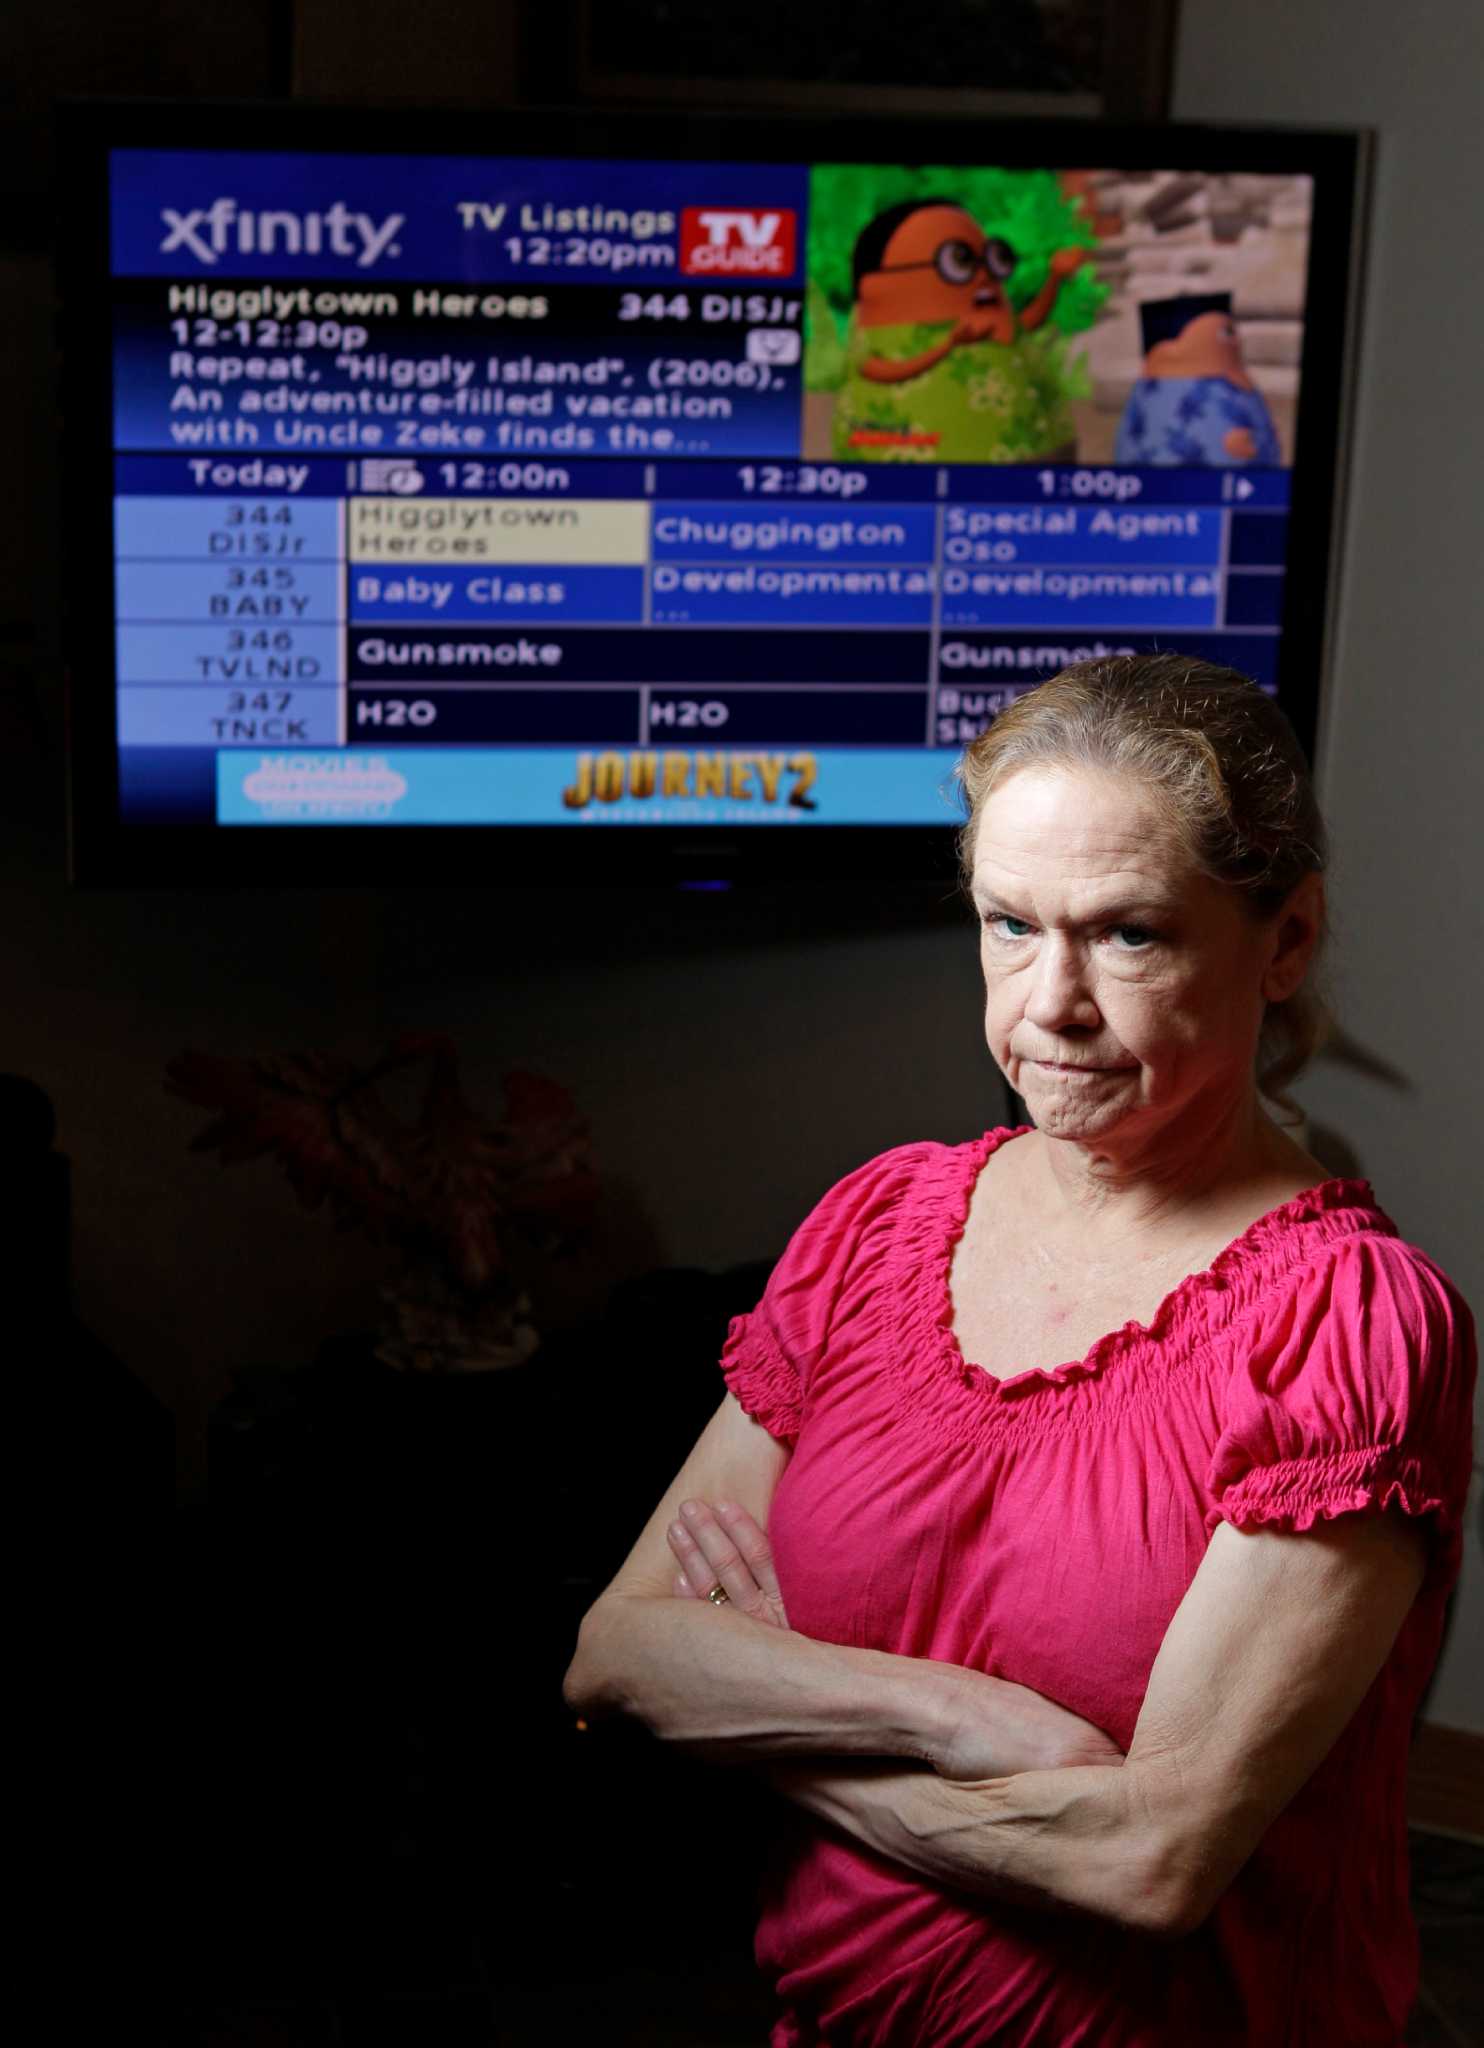 Woman fights Comcast over porn-filled $900 cable bill